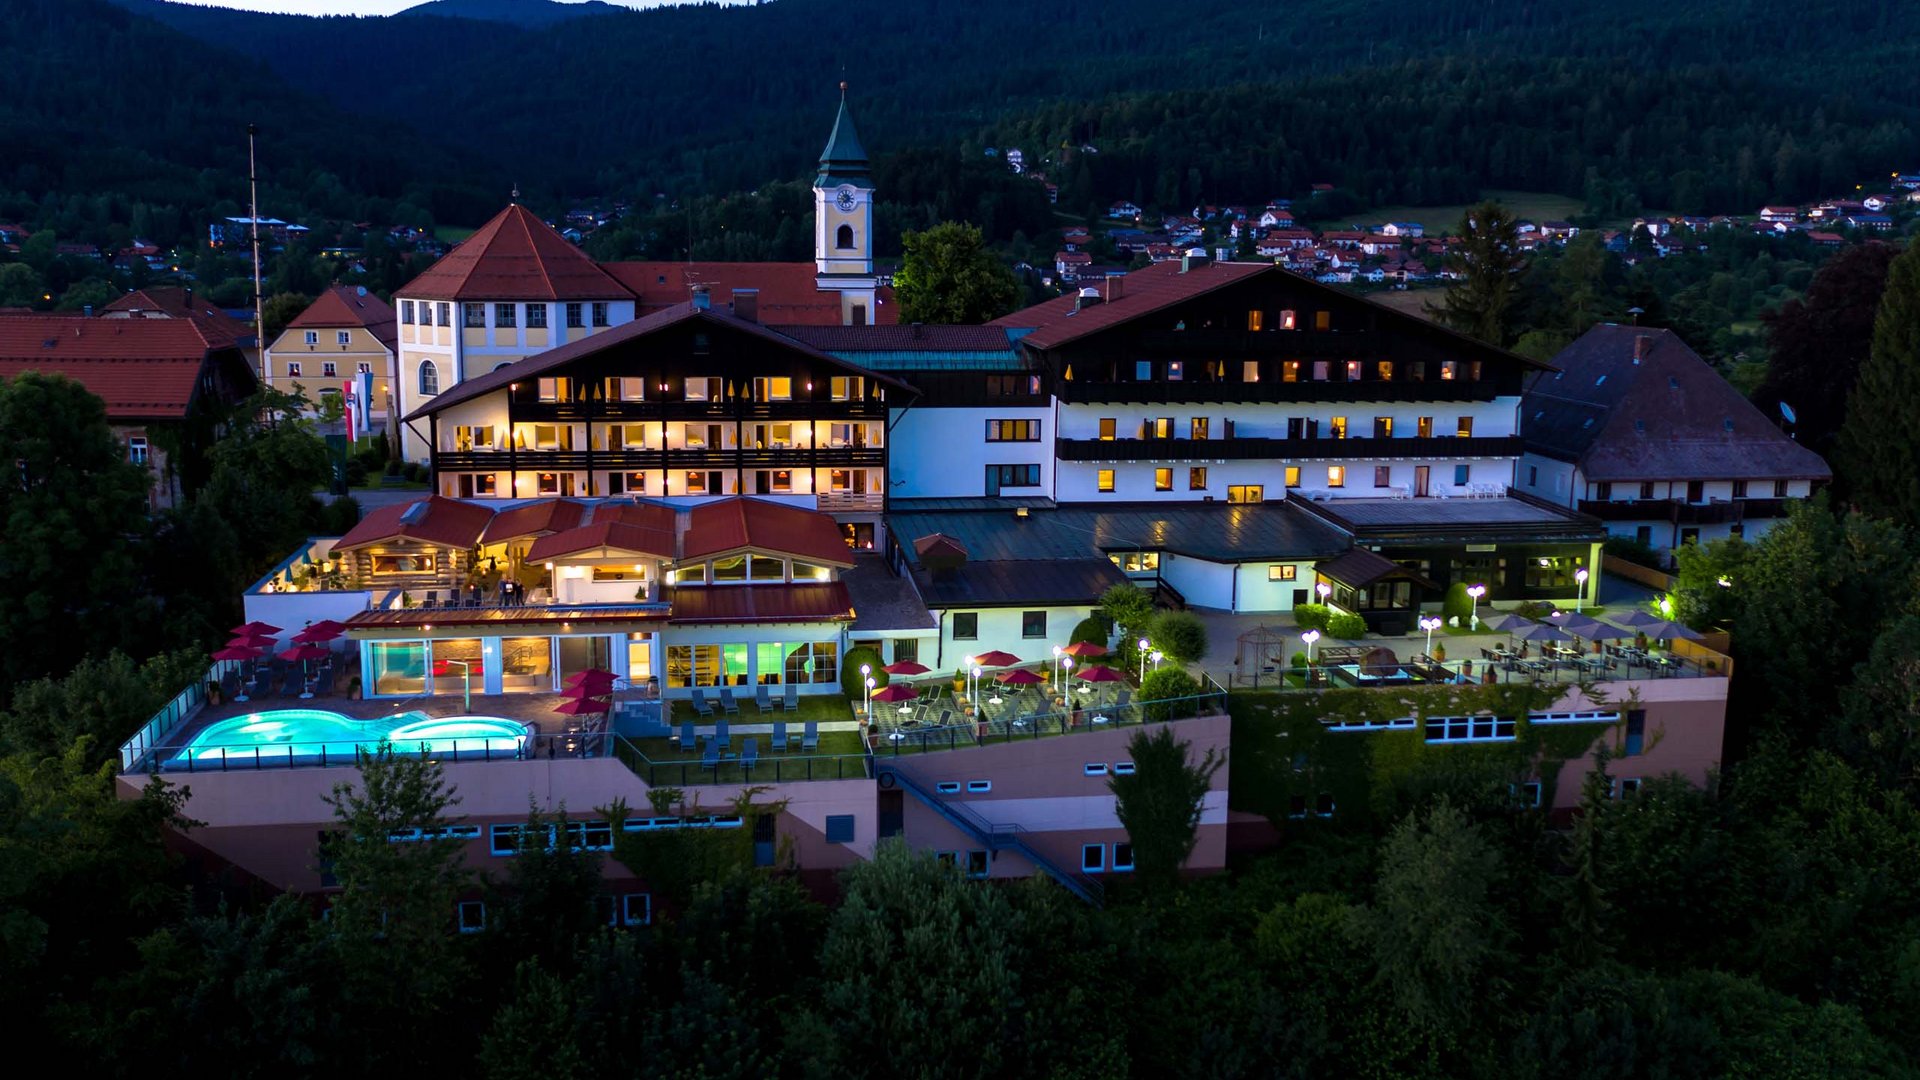 The Guest Club in our Bavarian Forest hotel in Bodenmais